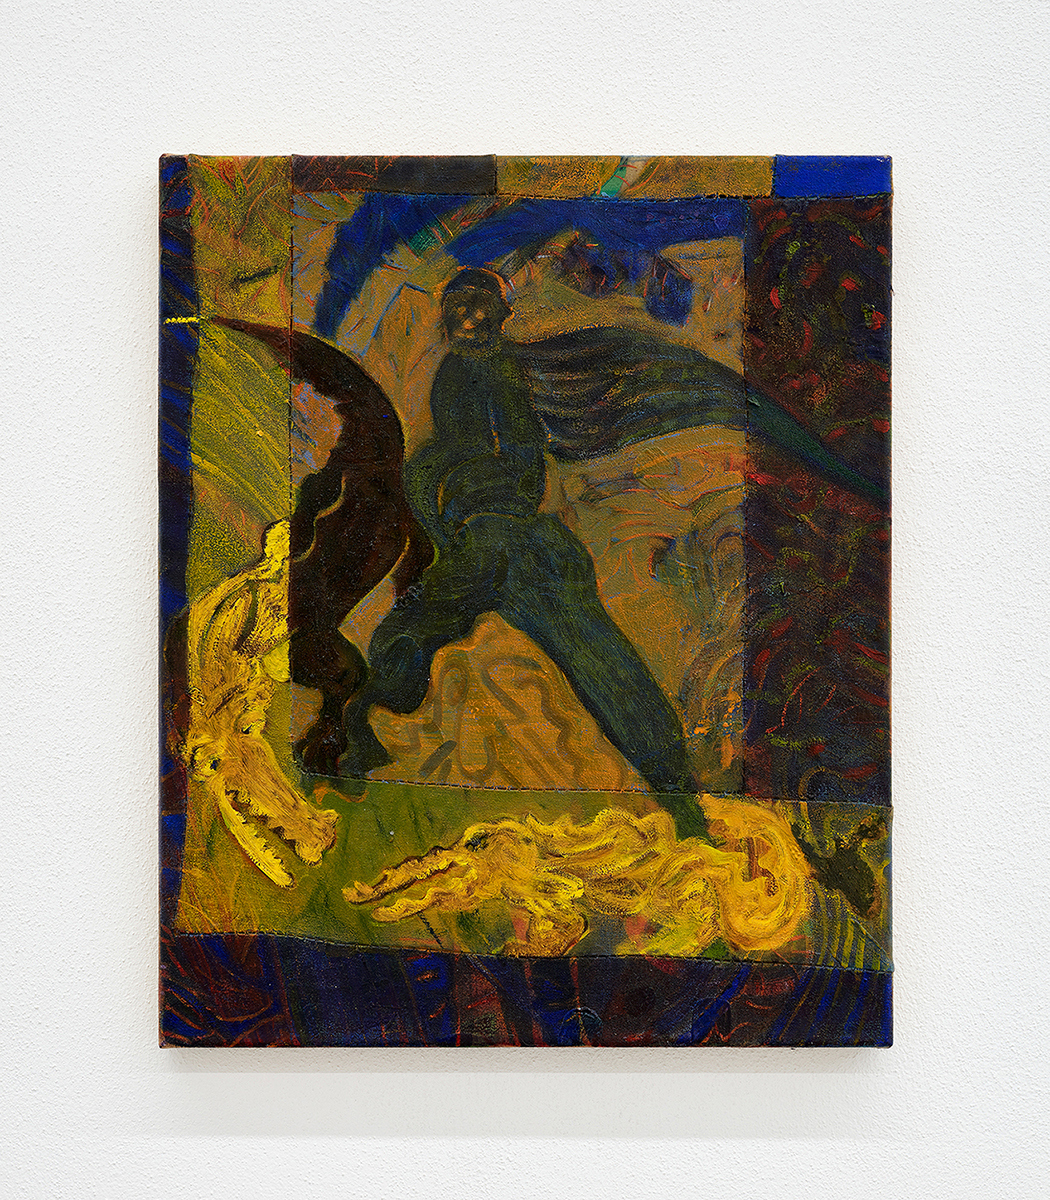 Anna Schachinger, "Saving Whom, From What", 2023 (Oil on sewn together fabric, 46,5 x 38,5 cm).